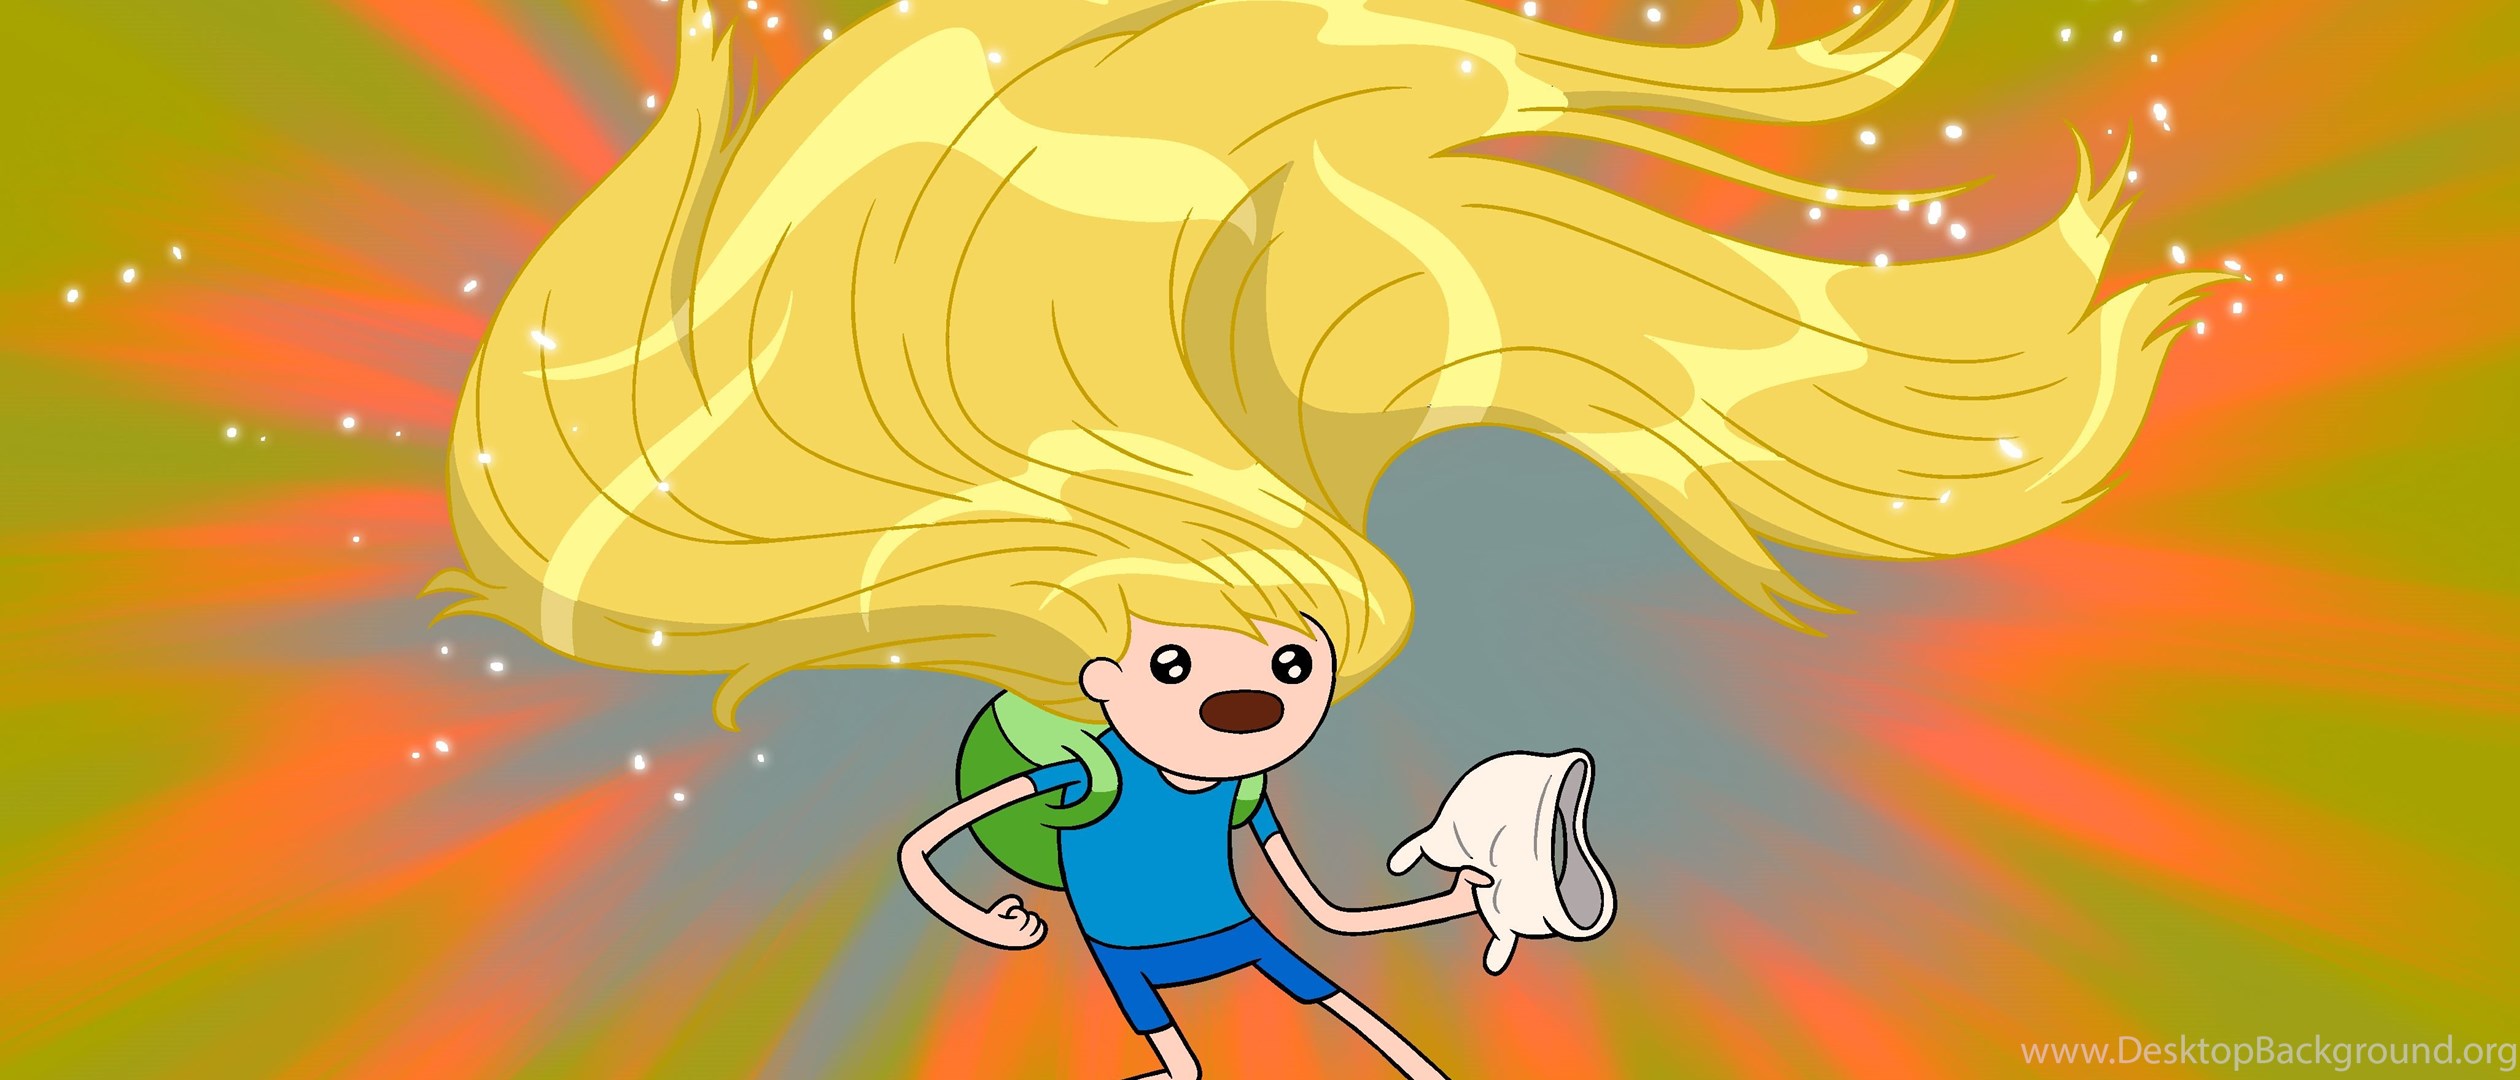 Download Adventure Time Wallpapers Download Free Widescreen Wide 21:9 2520x...